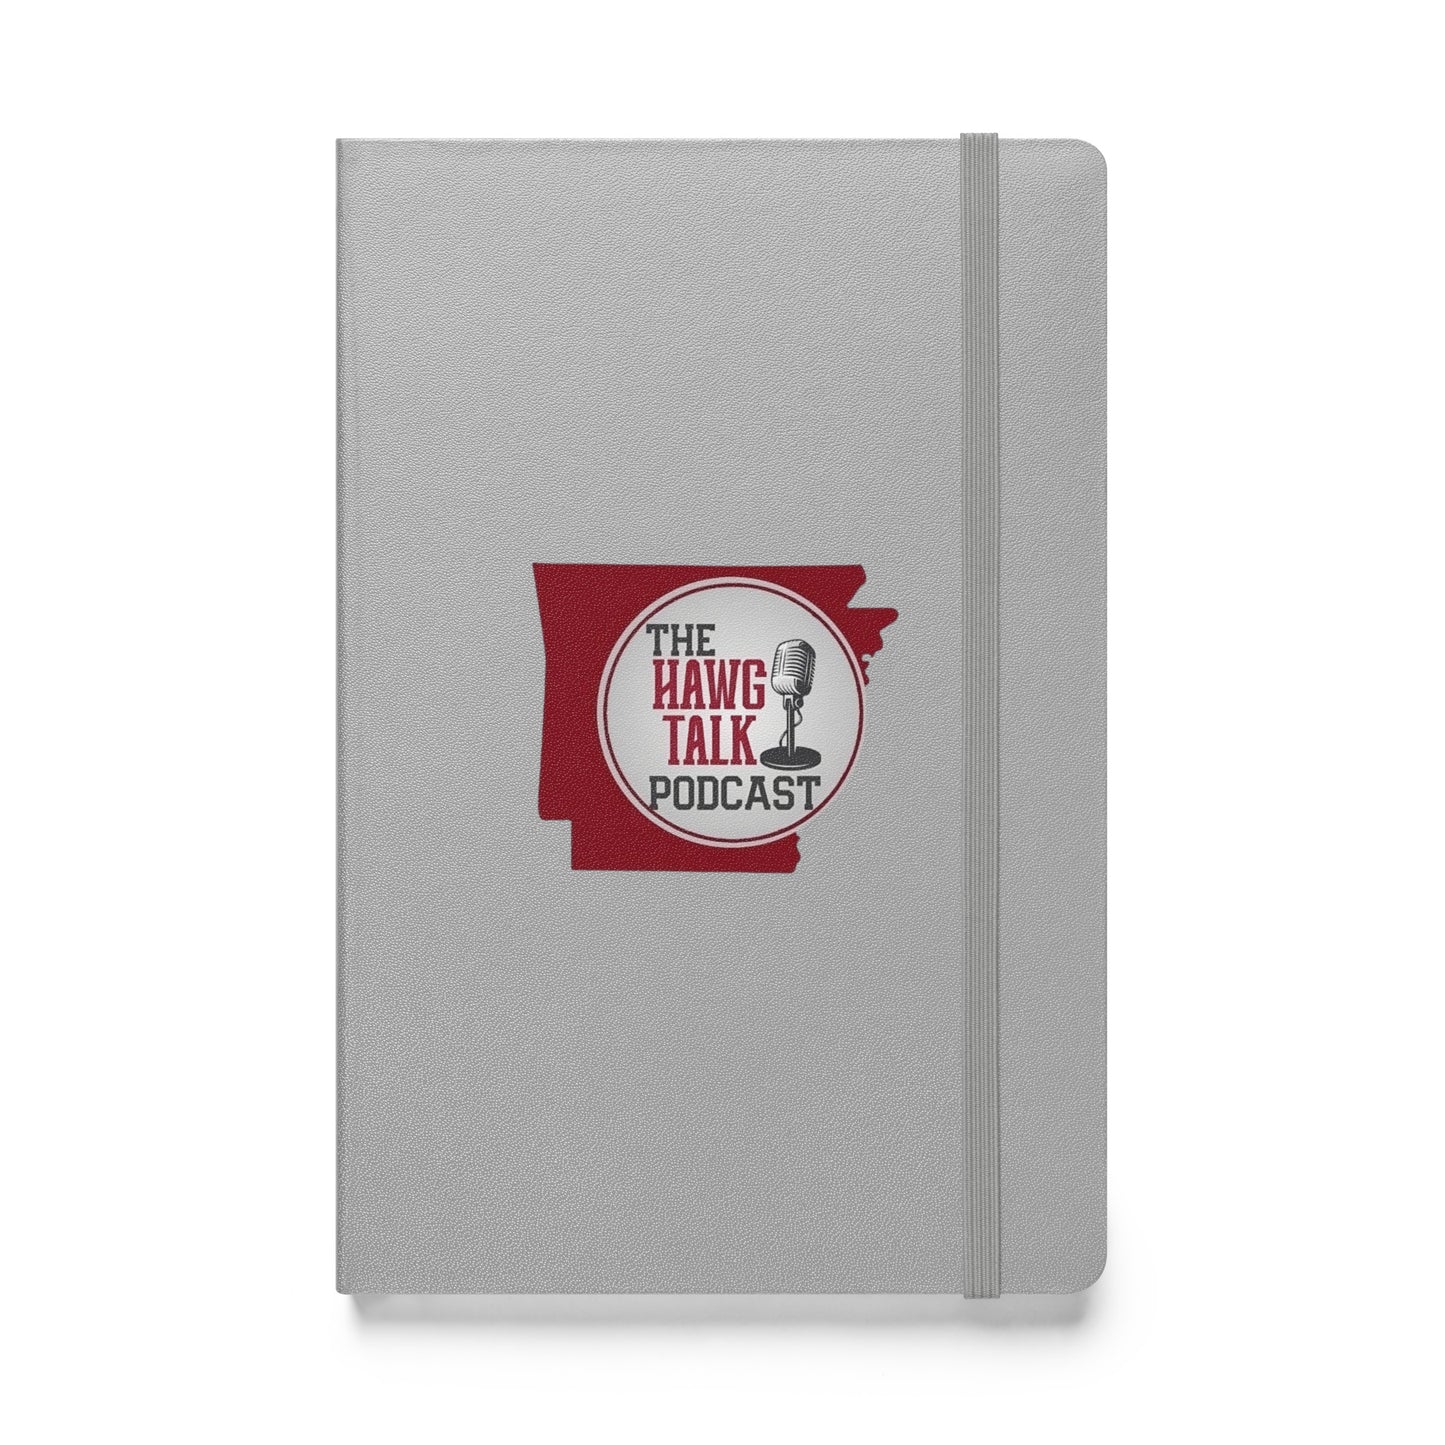 Hawg Talk Podcast Hardcover bound notebook